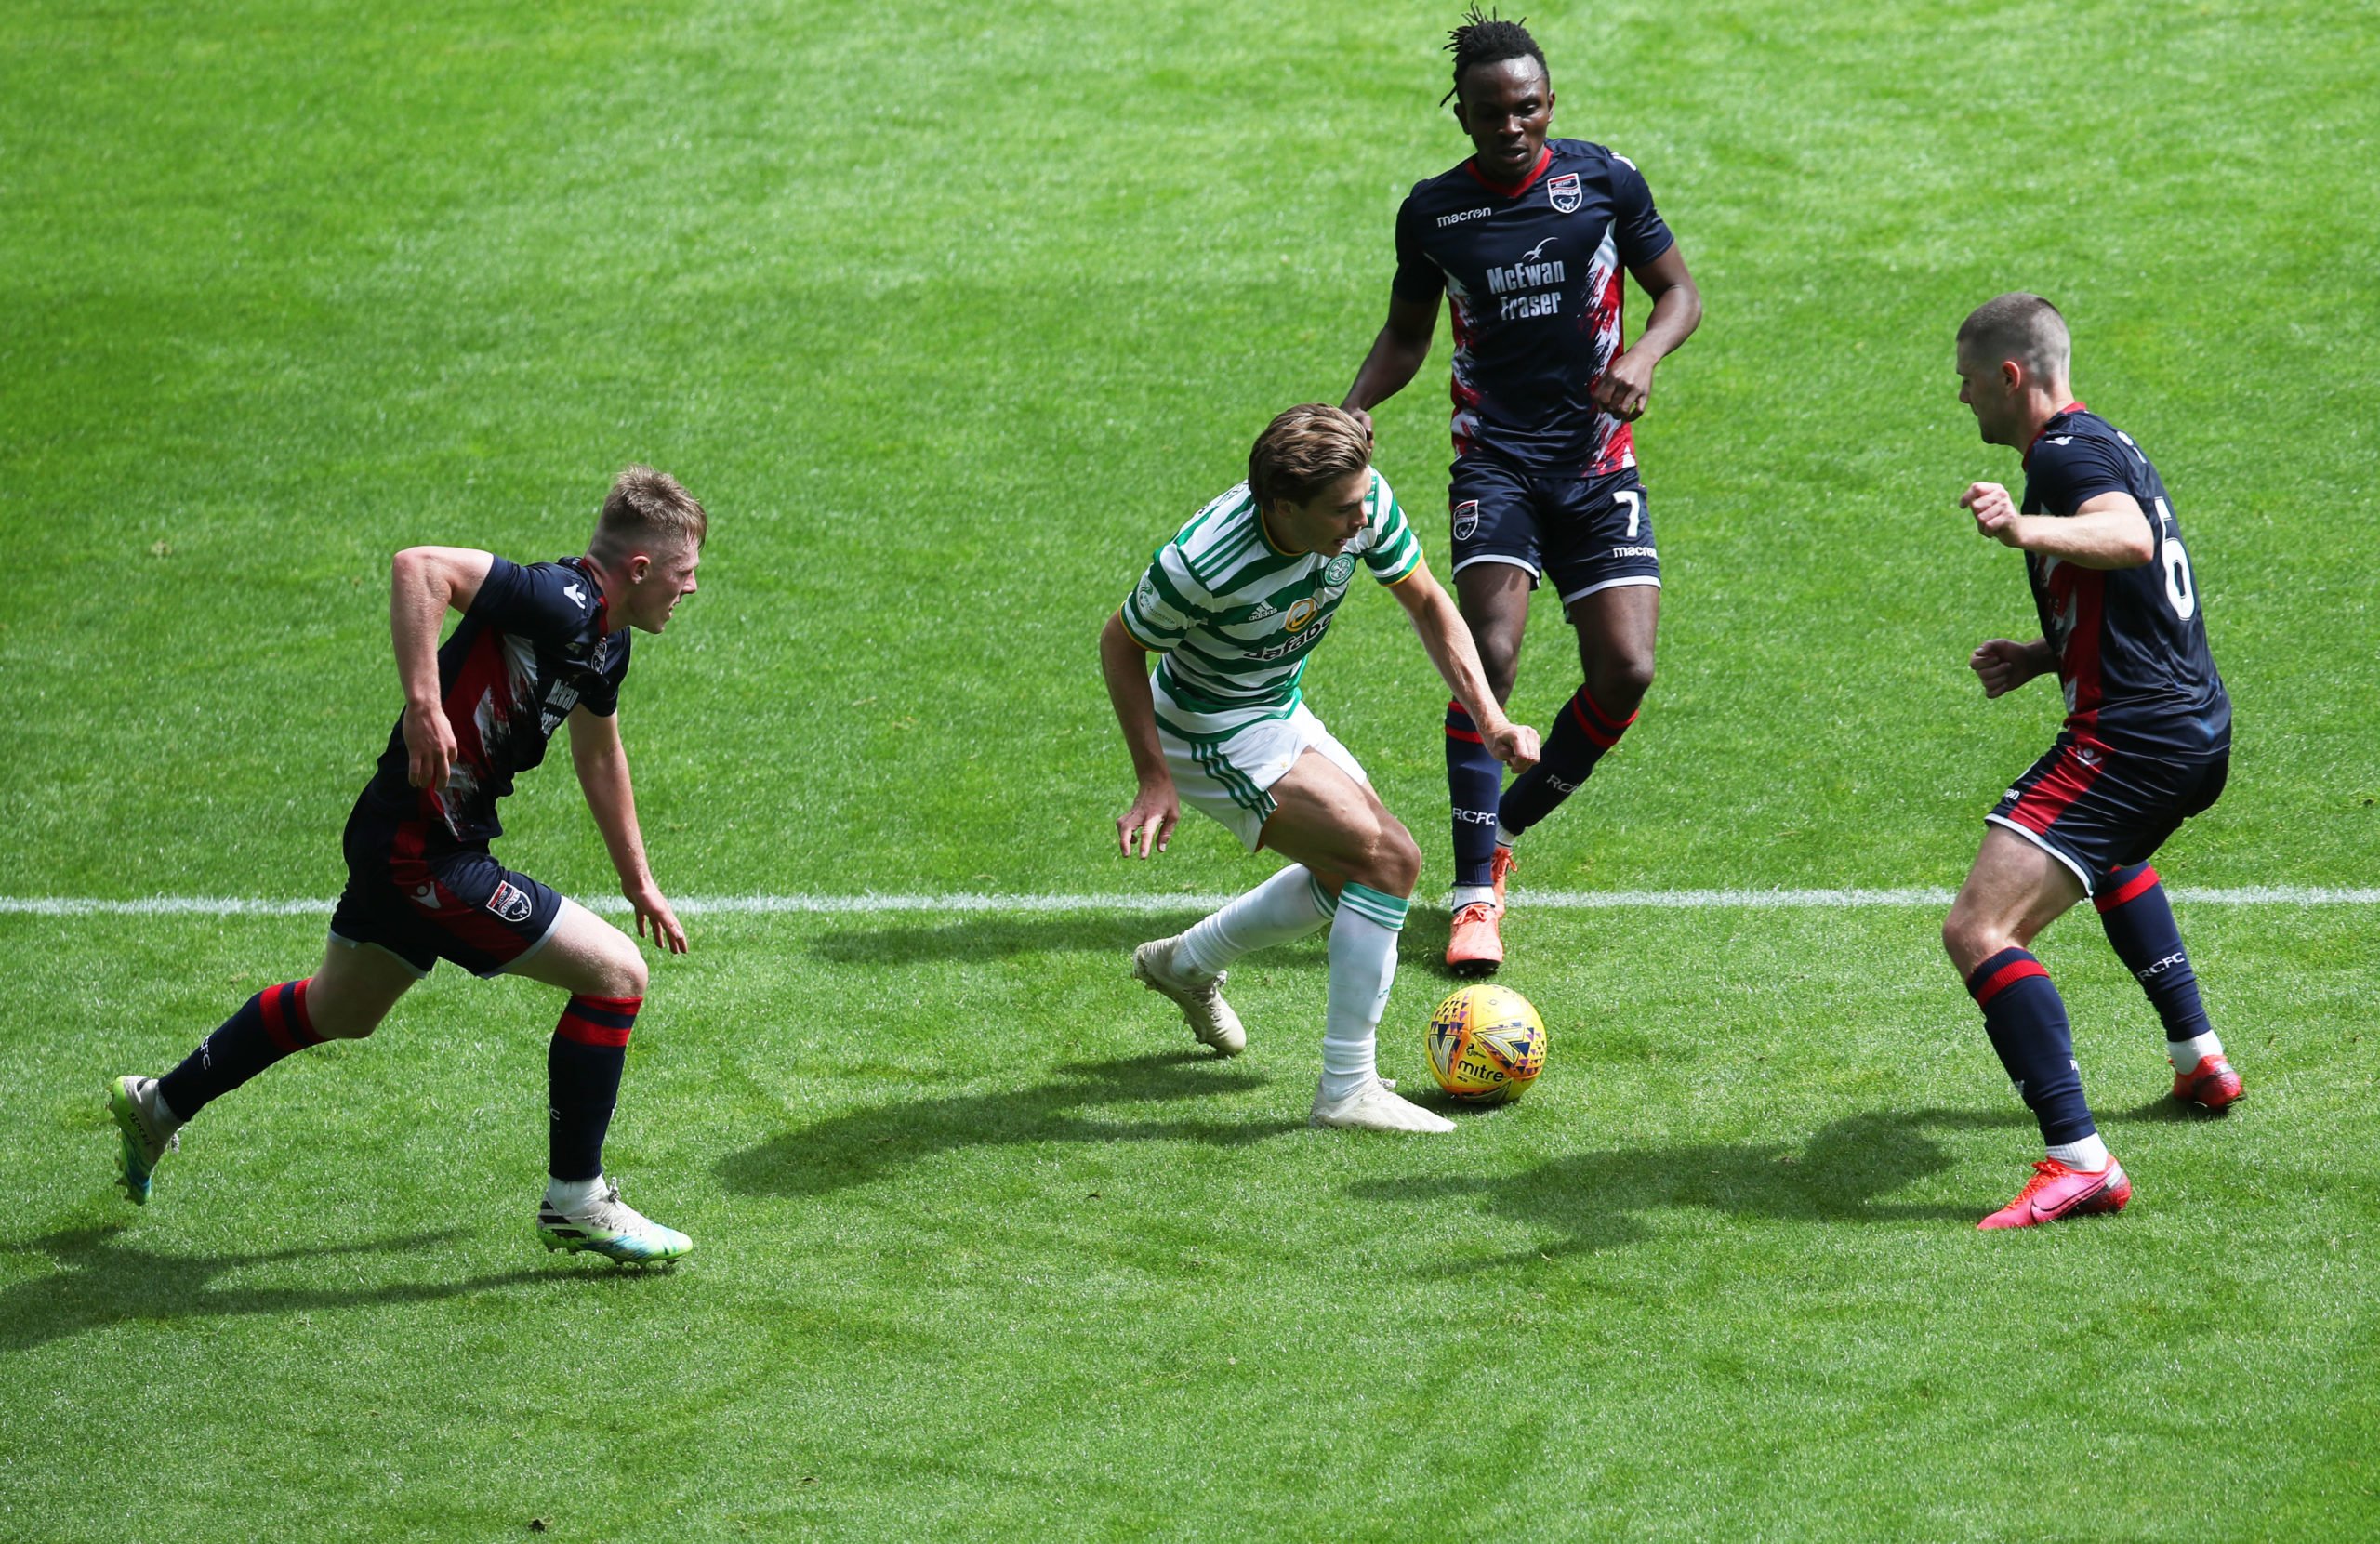 Celtic played Ross County in pre-season